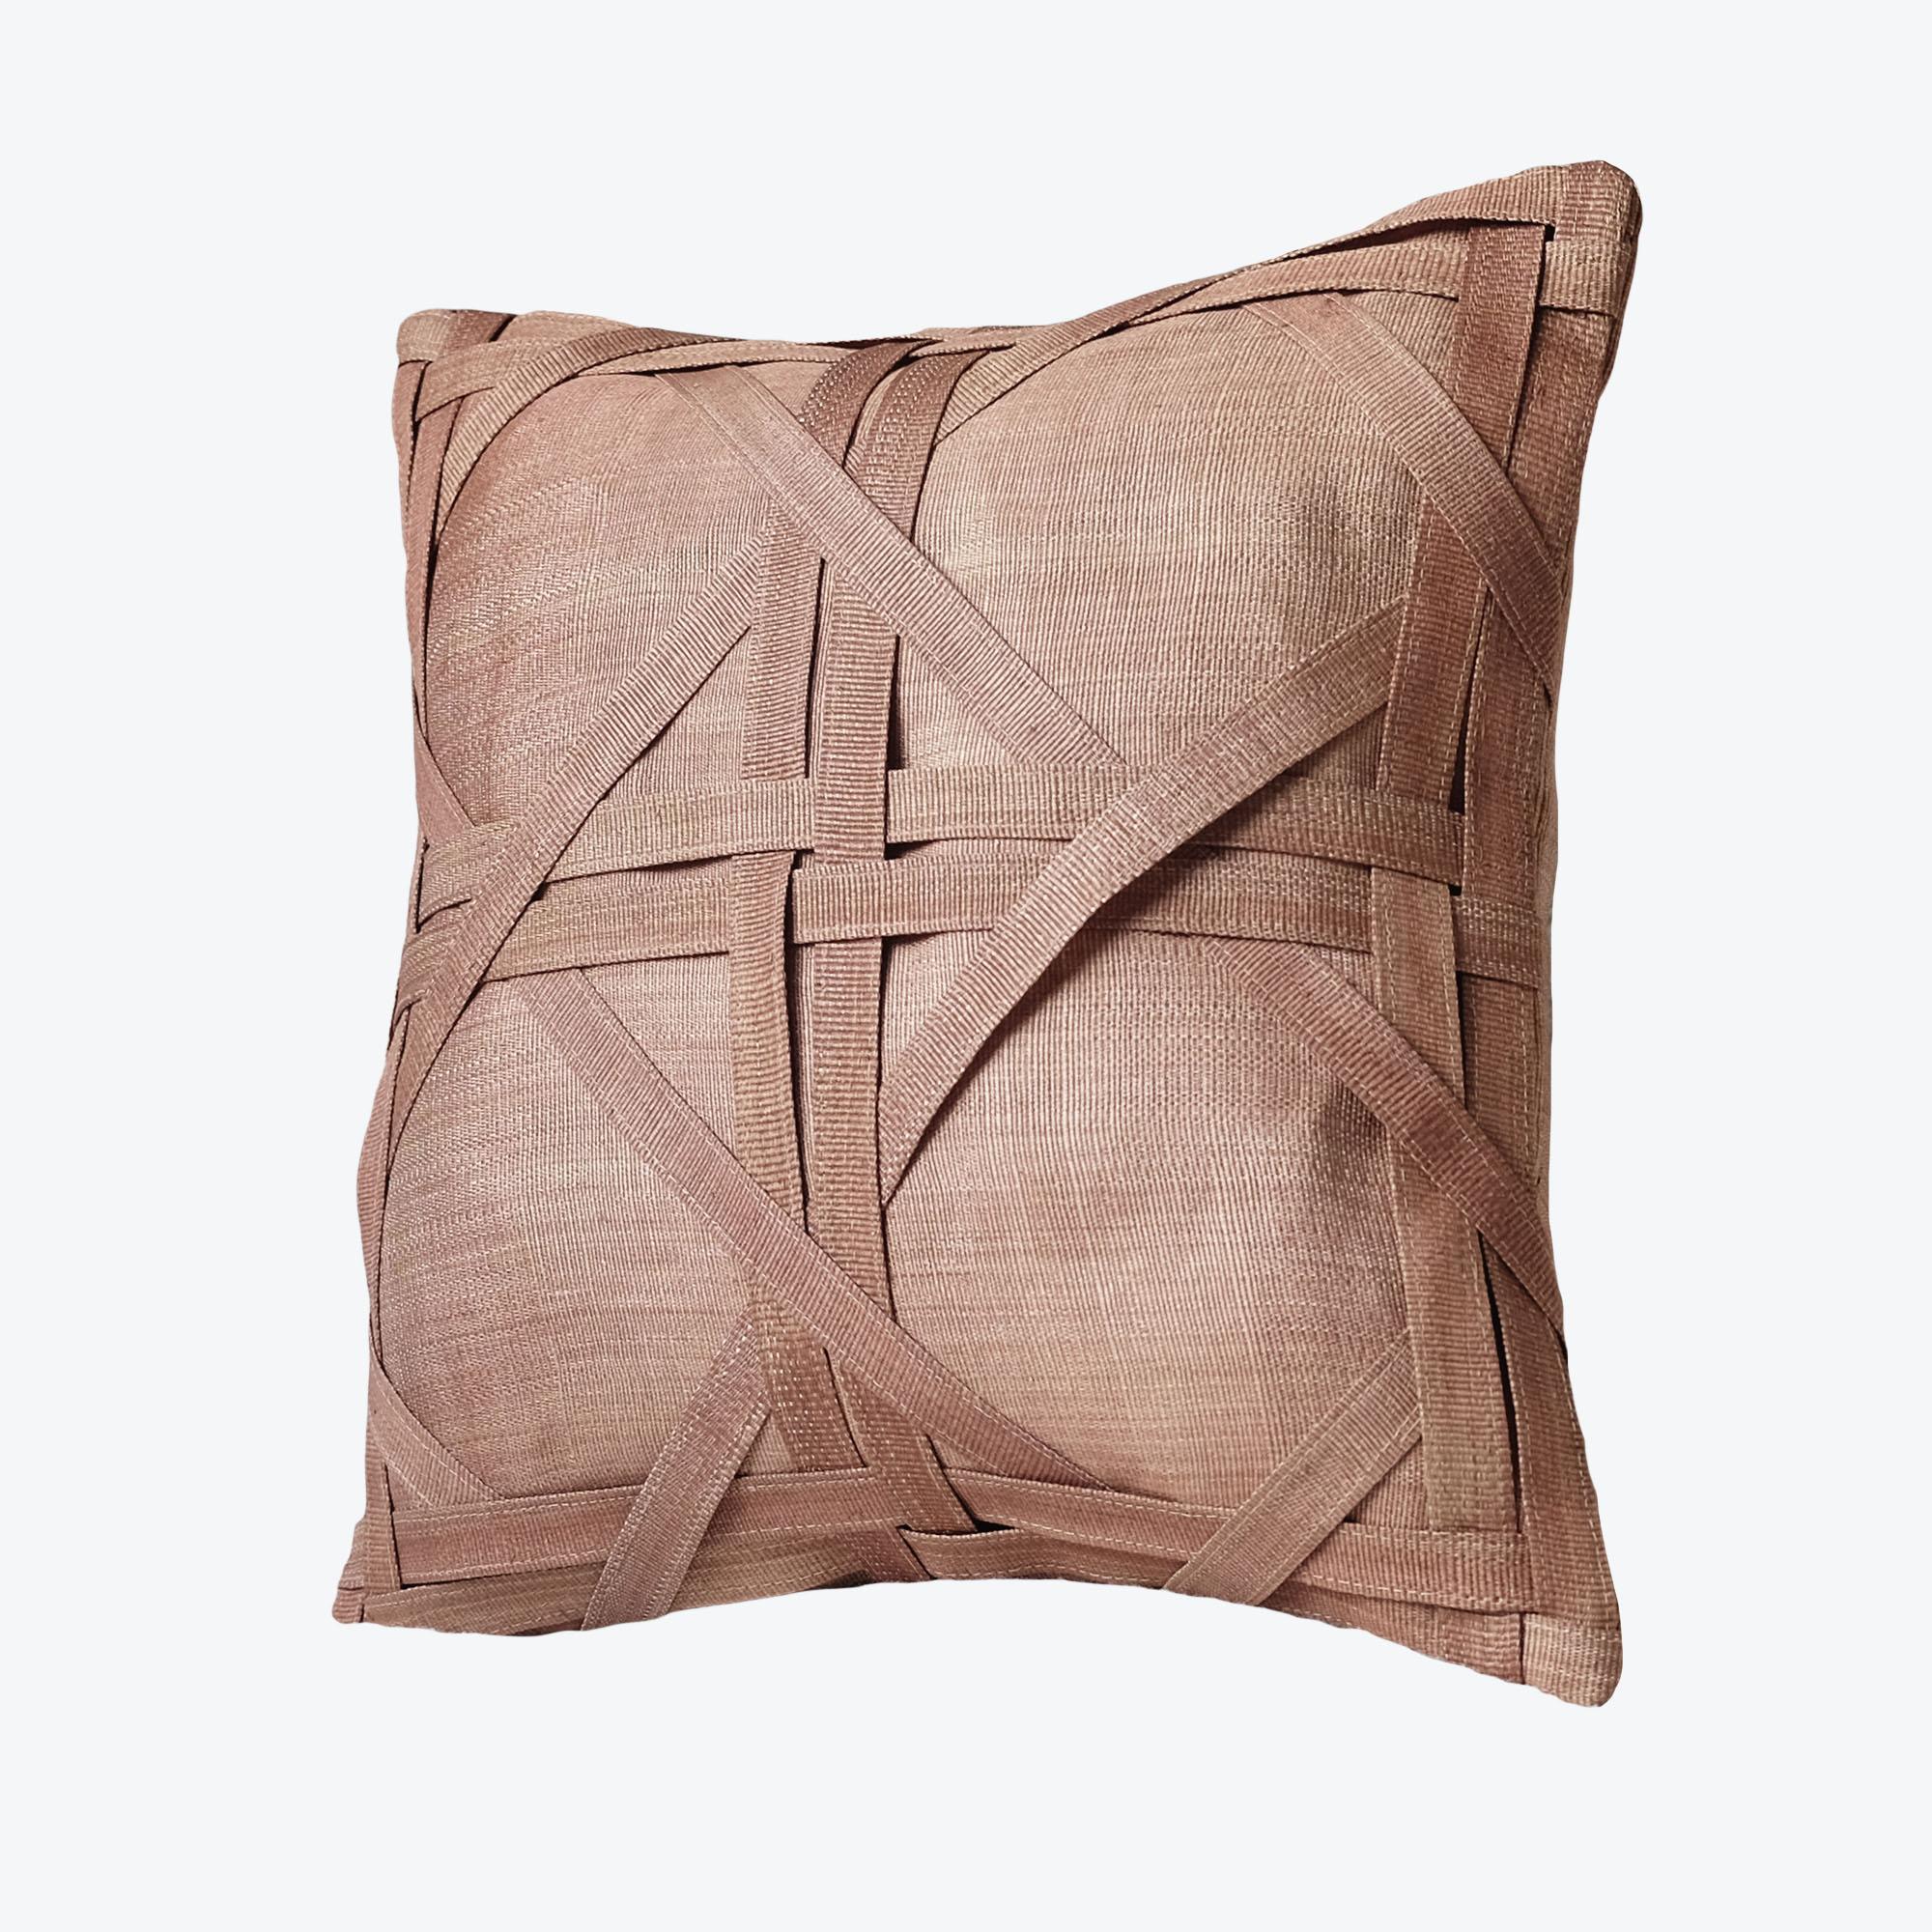 Handcrafted cushion cover made with naturally dyed and delicately woven T’nalak cloth from Abaca fibres and fastened with coconut shell buttons
Colour: rust

45 x 45 cm
17.7 x 17.7in
Recommended cushion filler: 56 x 56 cm / 22 x 22in

Cushion